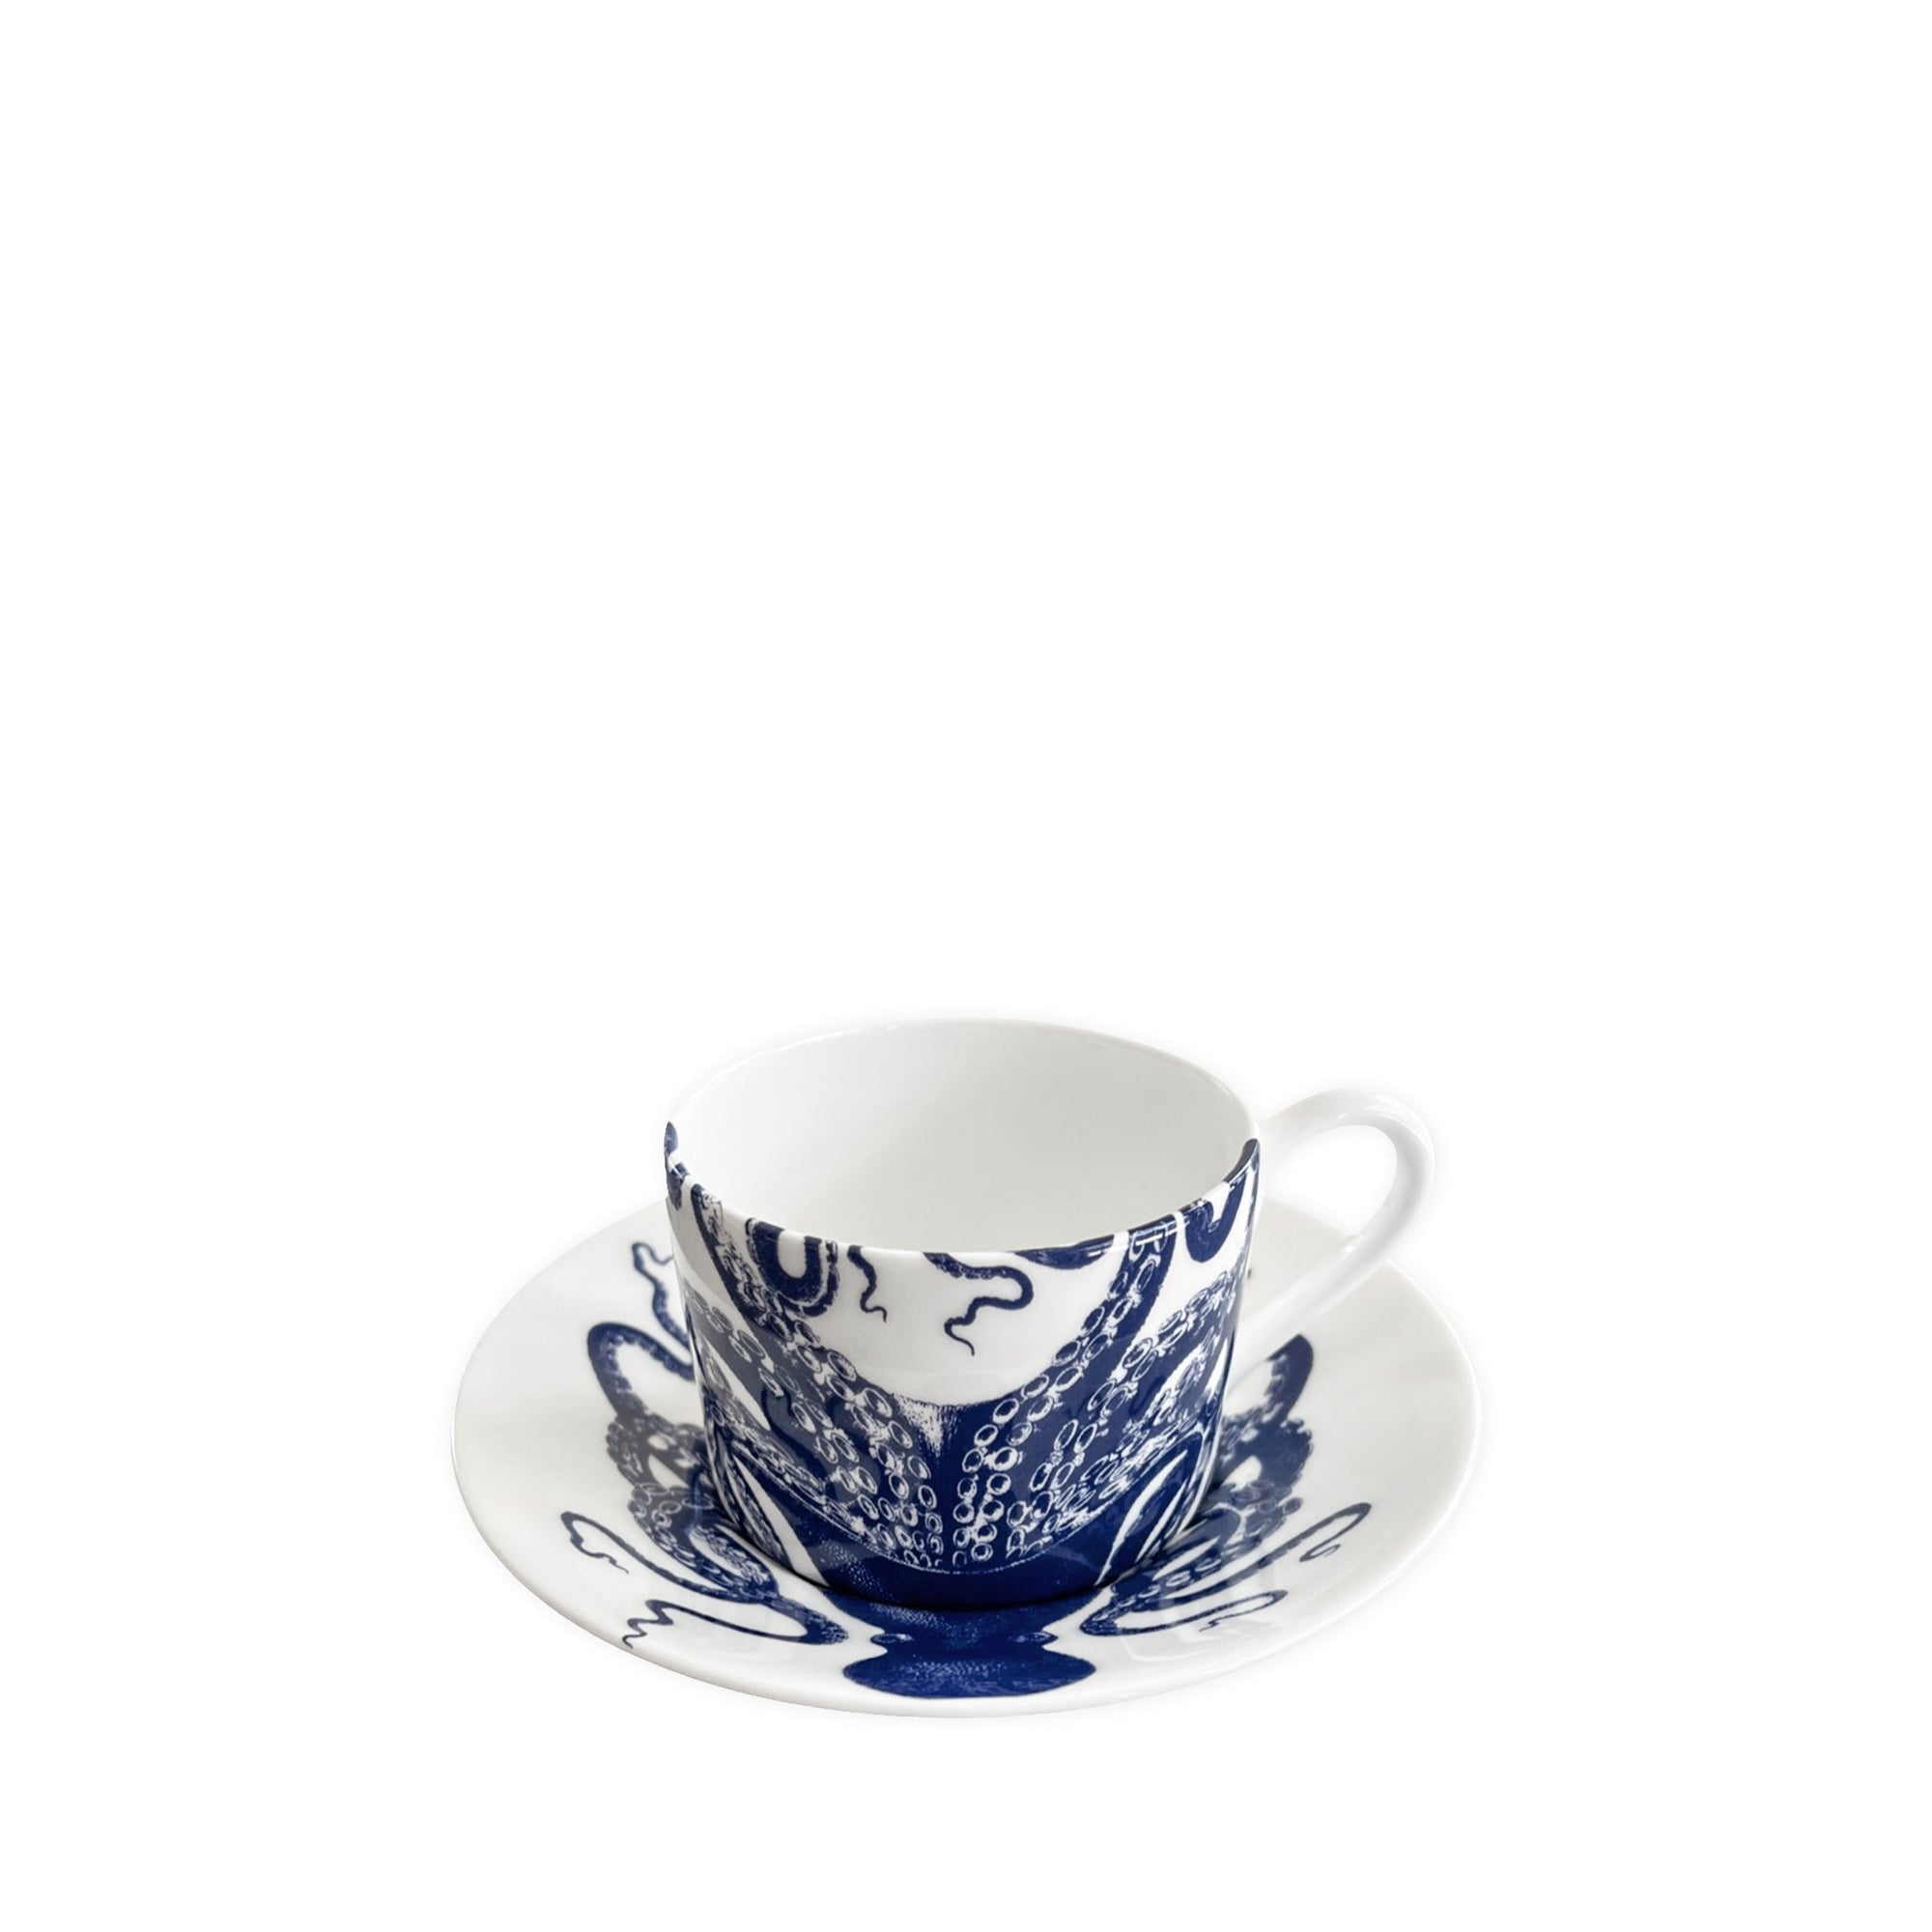 Two white ceramic teacups and saucers featuring charming blue octopus designs, crafted from bone china and dishwasher safe are known as the Lucy Cups & Saucers, Set of 2 by Caskata.